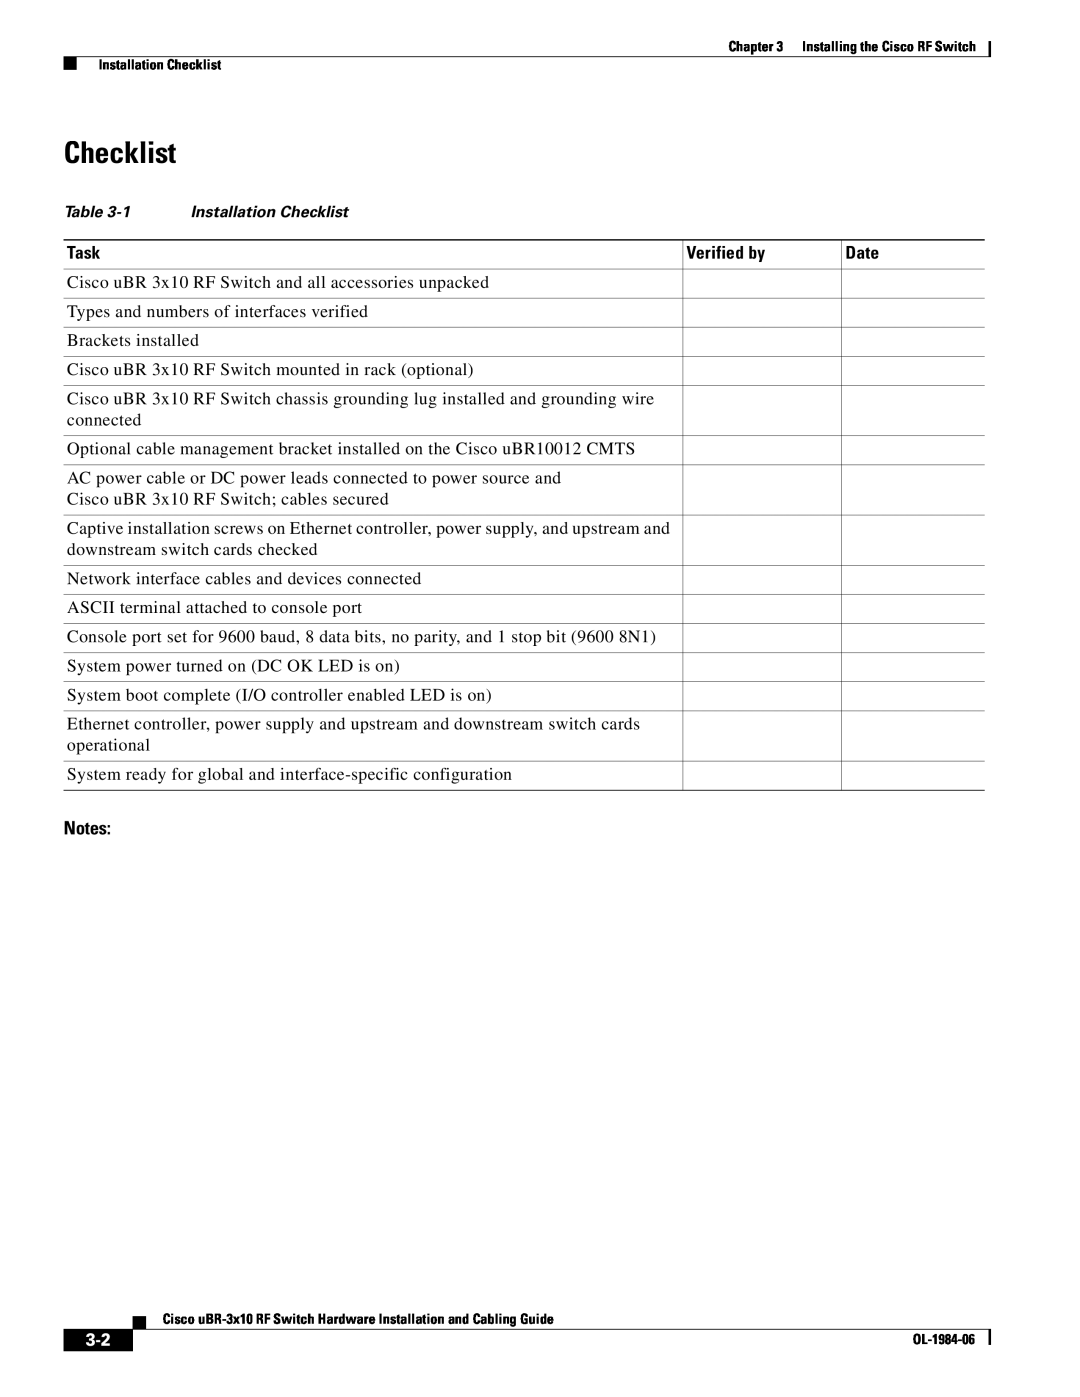 Cisco Systems UBR-3X10 manual Checklist, Task, Verified by, Date 